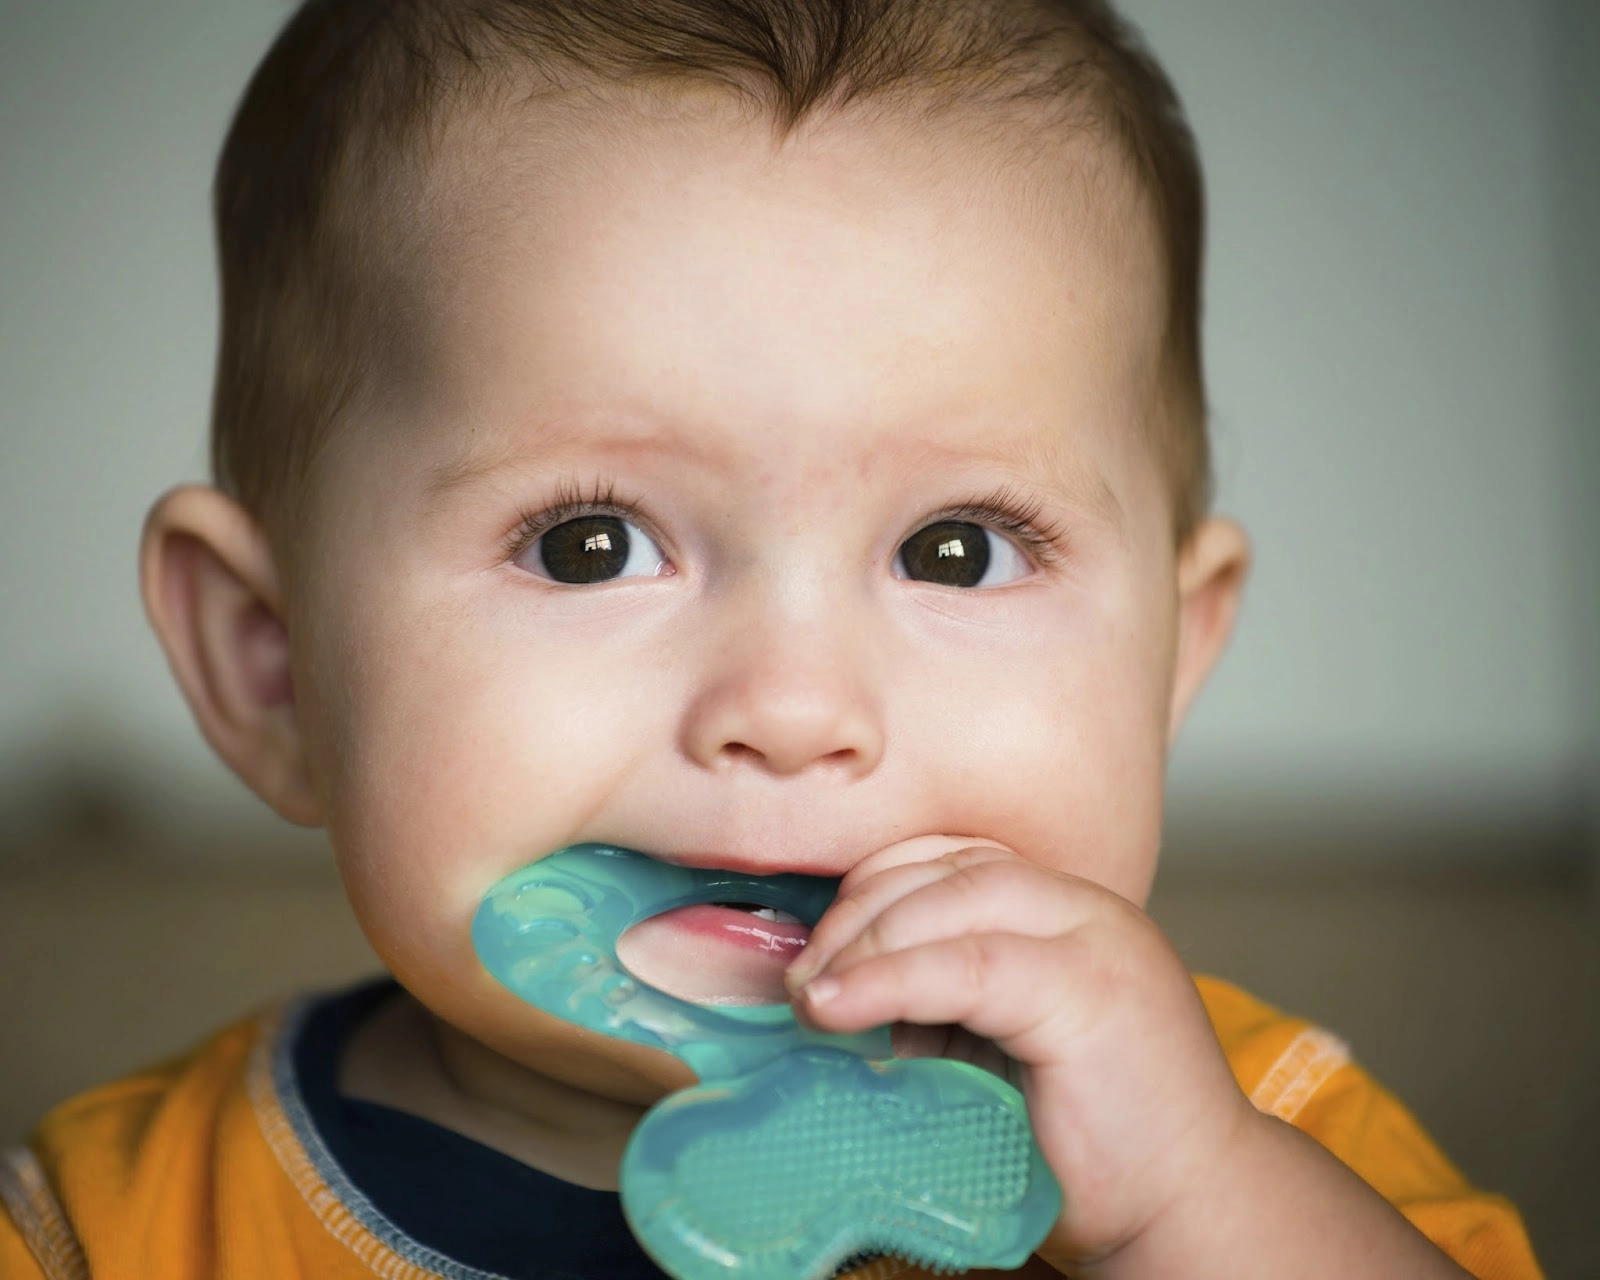 Tips for Soothing a Teething Baby